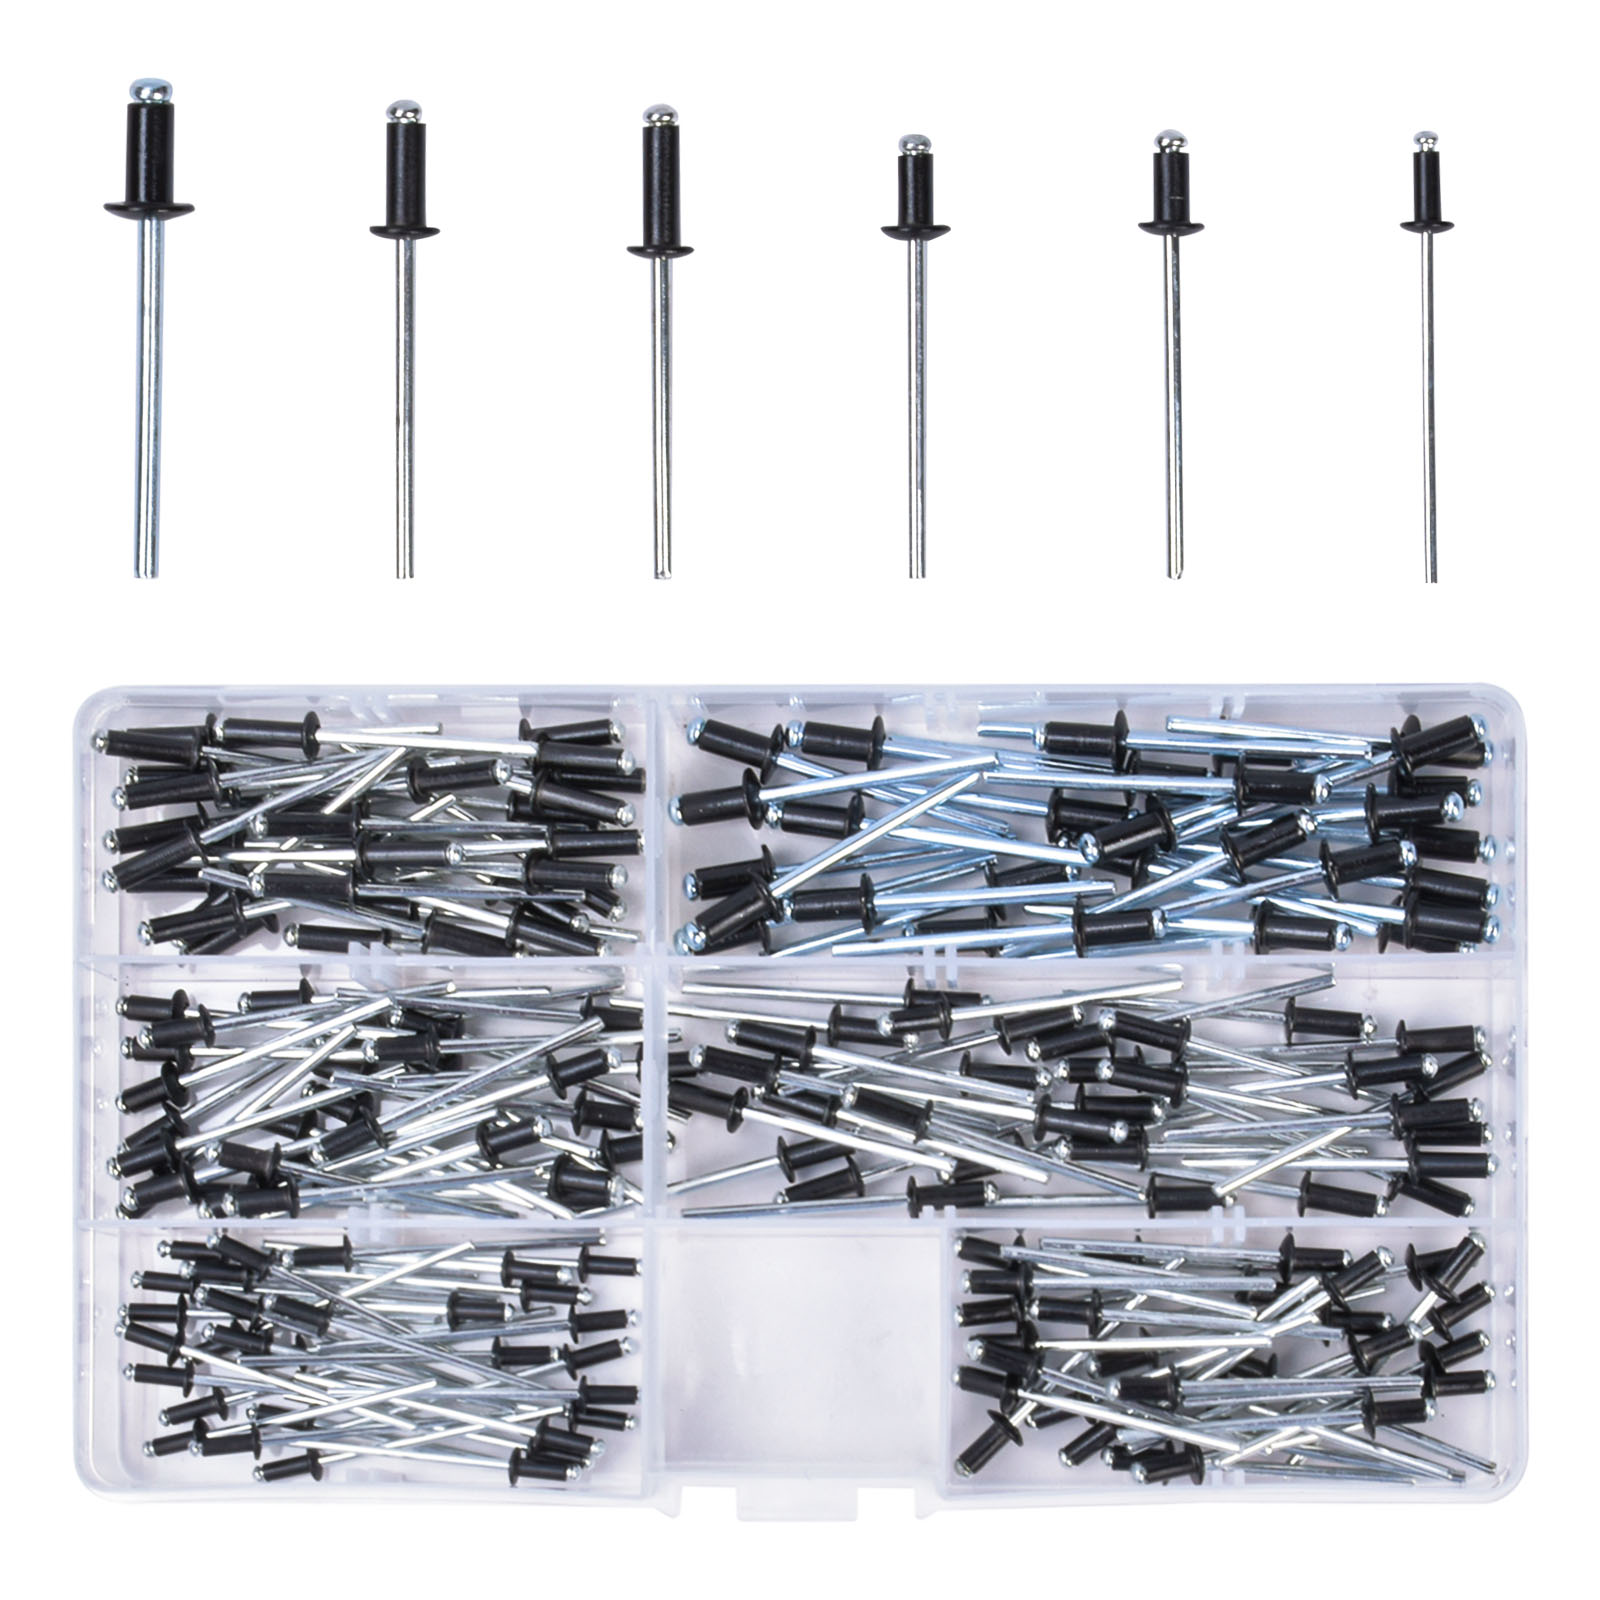 Black Pop Rivets Assortment Kit 529 Pieces, 15 SAE Sizes Blind Rivets for  Metal with Storage Case, Black Aluminum Rivets for Automotives, Aviation,  Ships, DIY Home - Yahoo Shopping